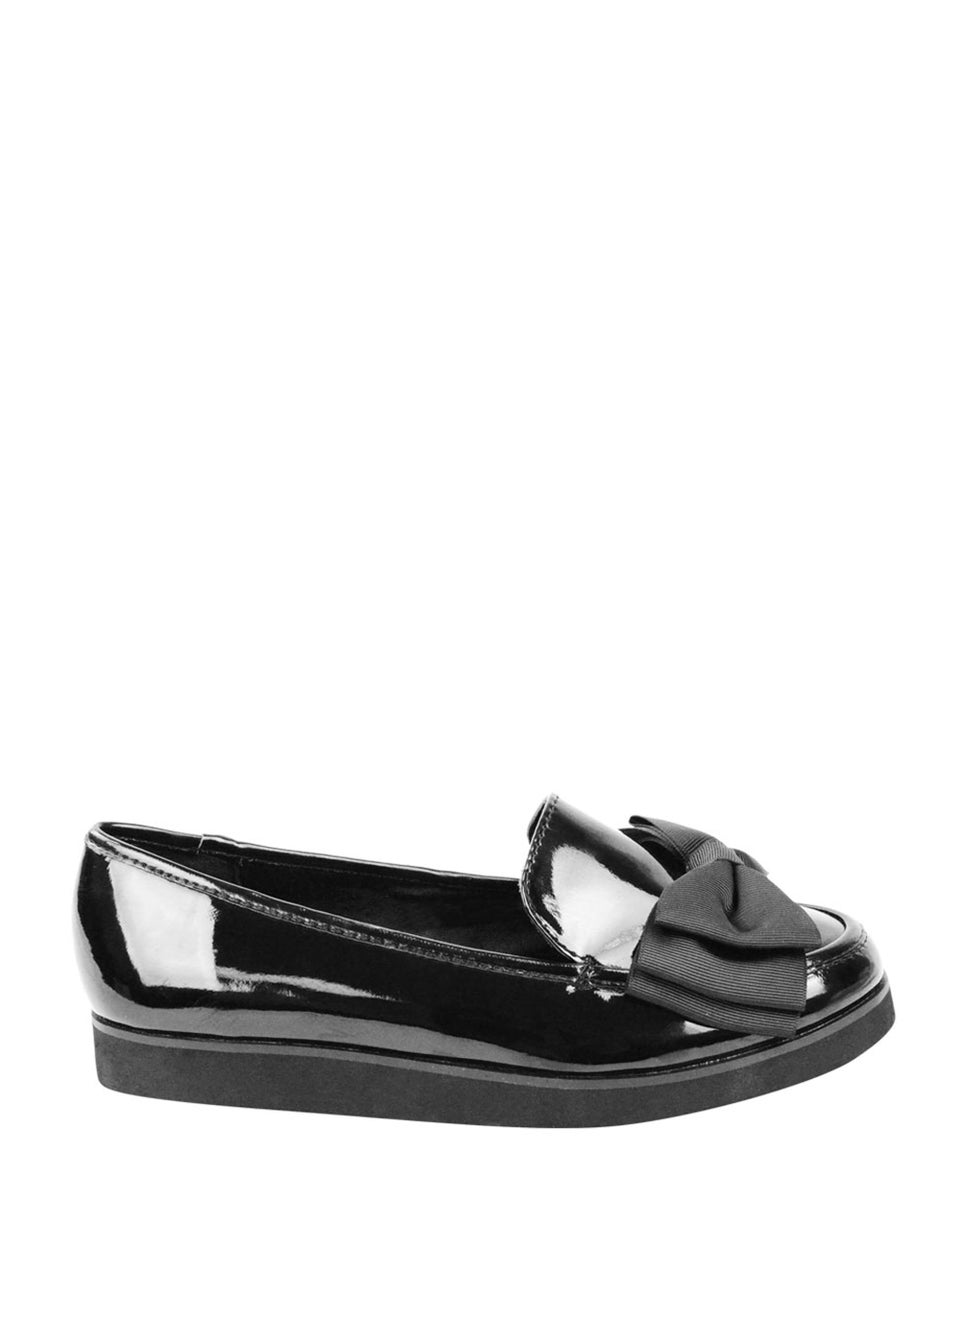 Where's That From Black Patent Pu Alpha Slip On Loafer